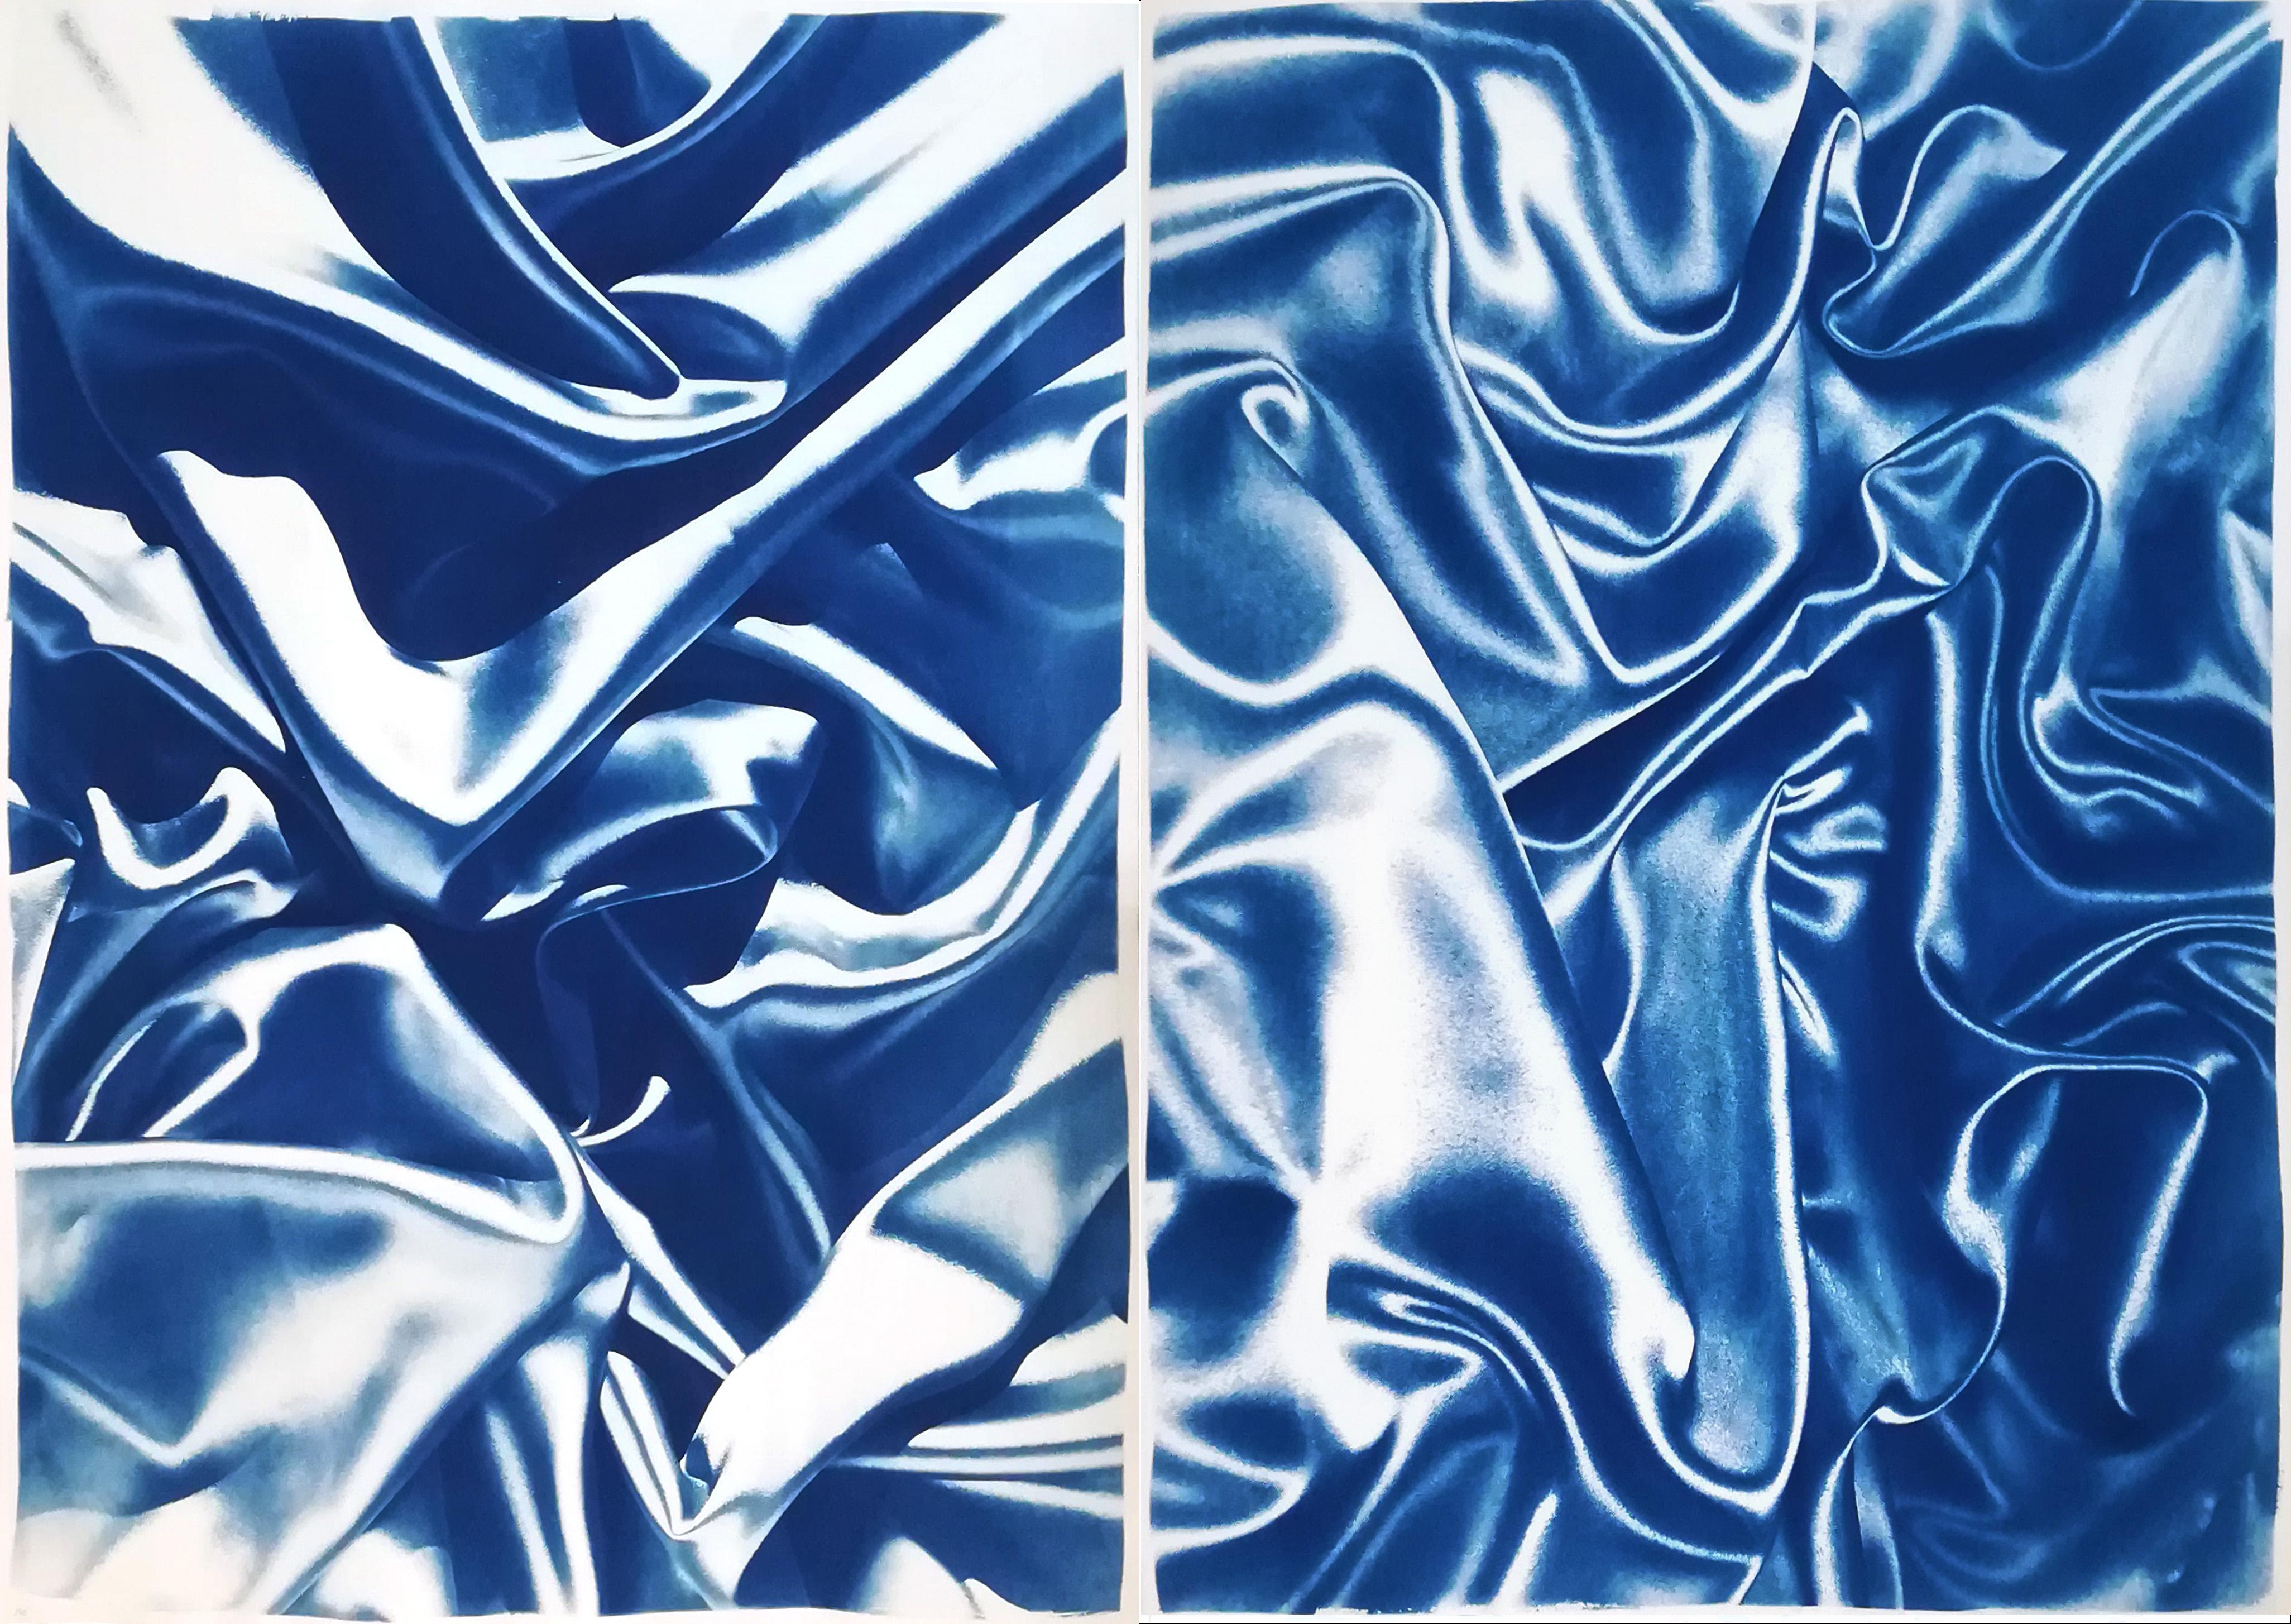 Kind of Cyan Landscape Painting - Diptych of Silks, Classic Blue Sensual Shapes, Cyanotype on Watercolor Paper 